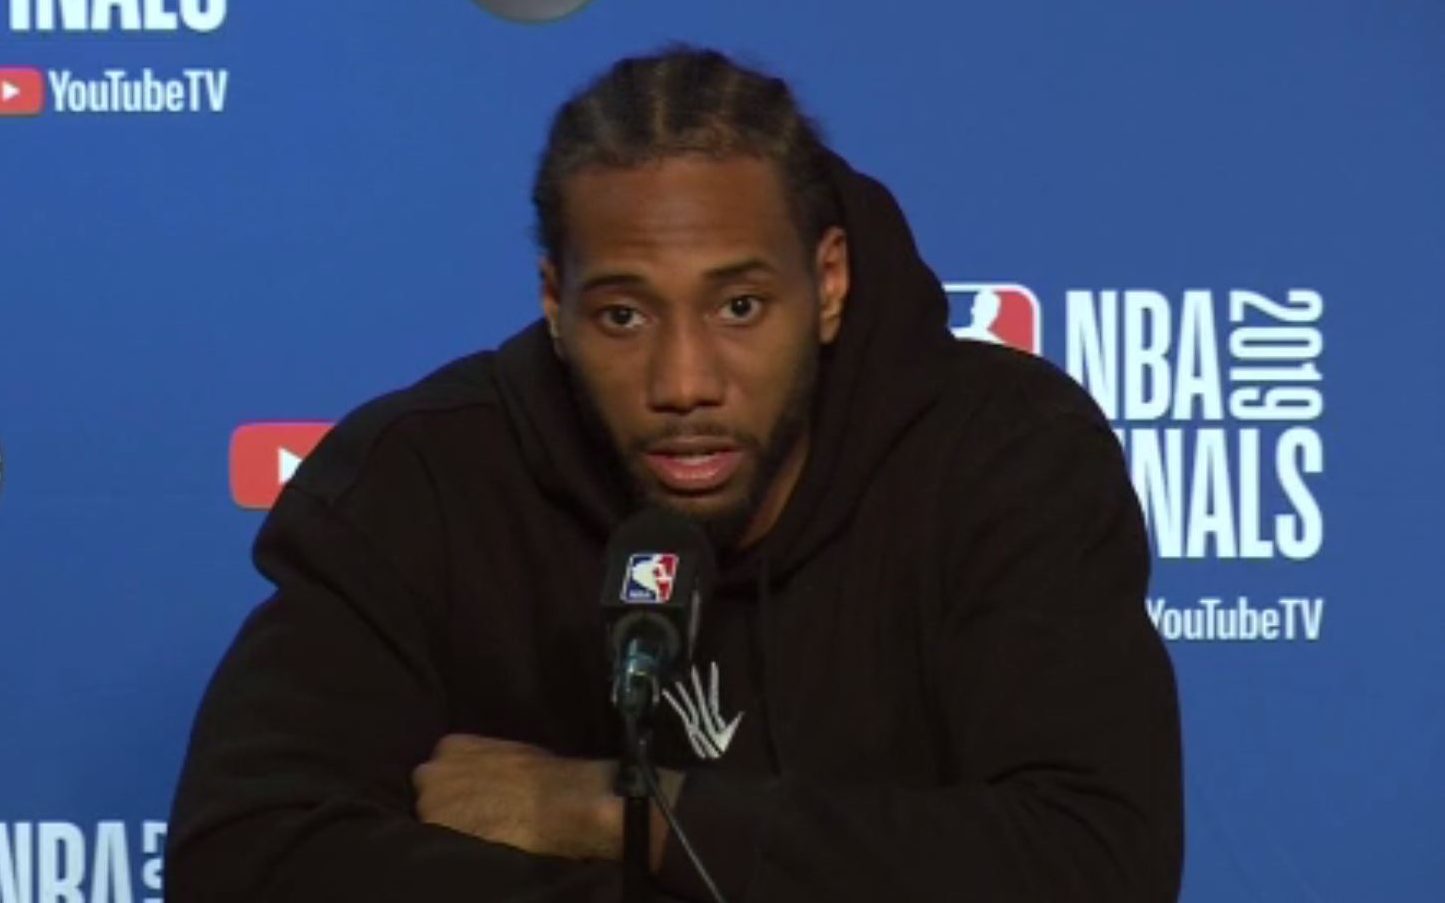 Why do people say that Kawhi Leonard is so quiet? Are other